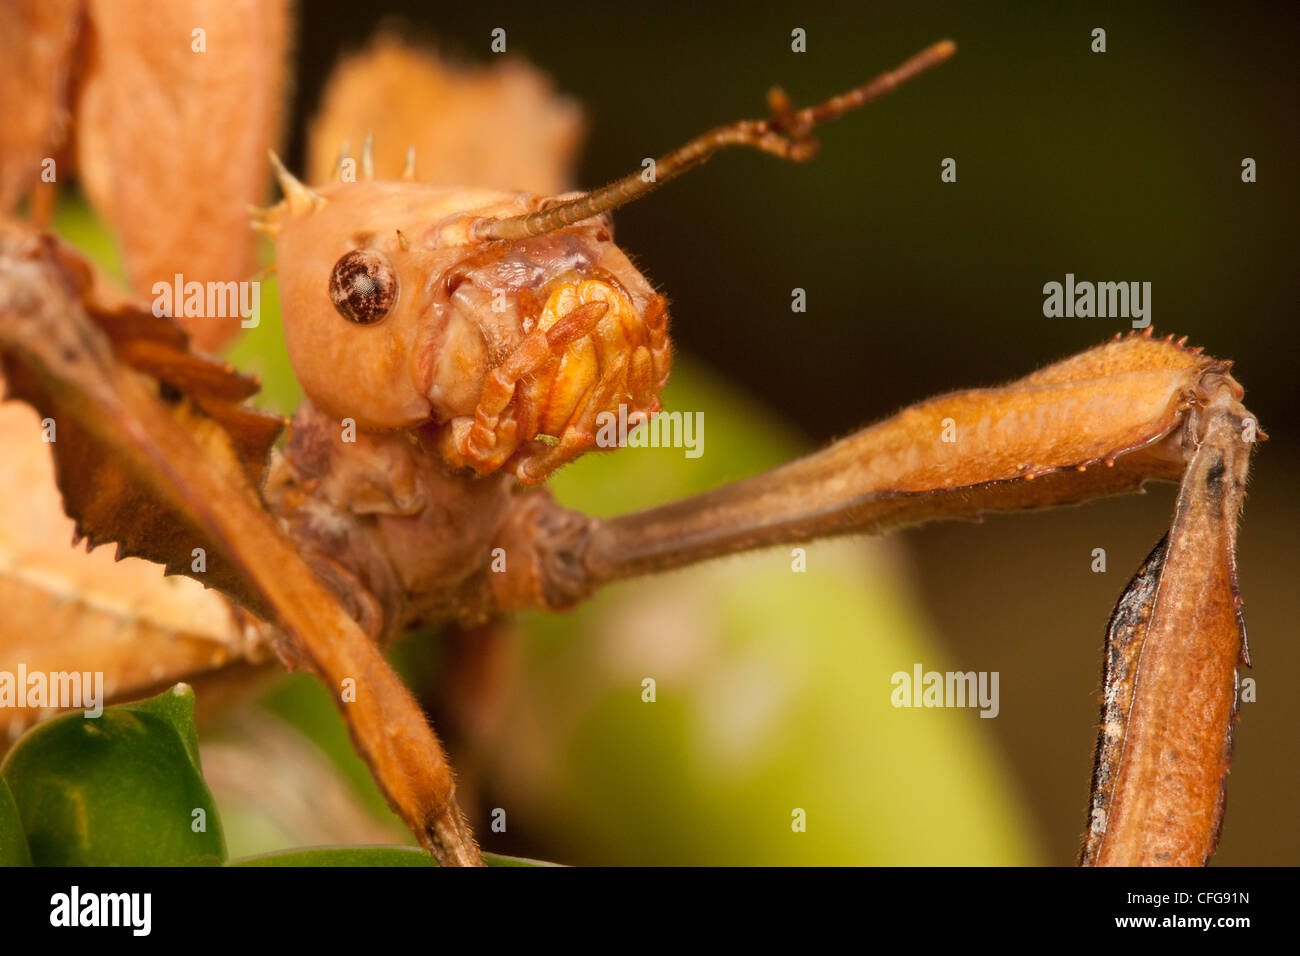 Close up of the head of a Prickly Stick Insect (Extatosoma tiaratum) Stock Photo